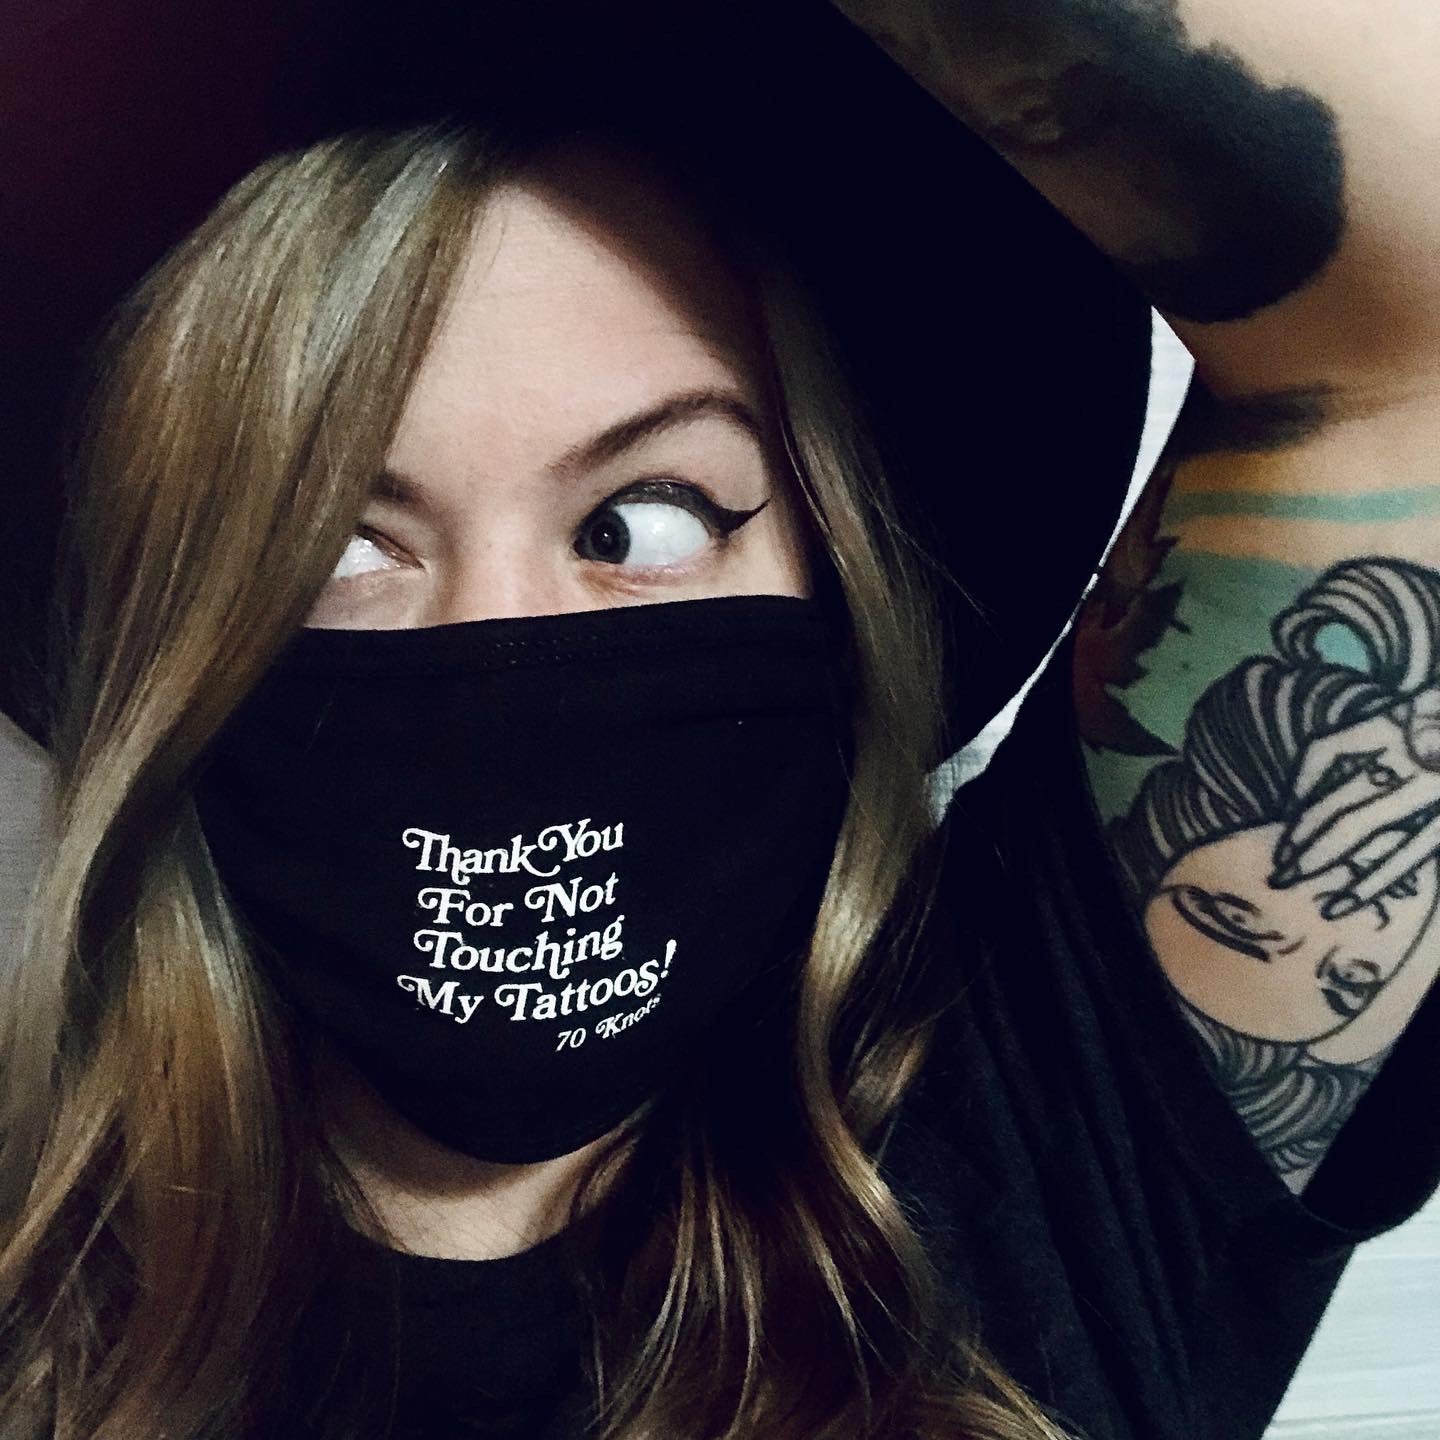 THANK YOU for Not Touching My Tattoos, 3-Ply Cotton Facemask - 70 Knots